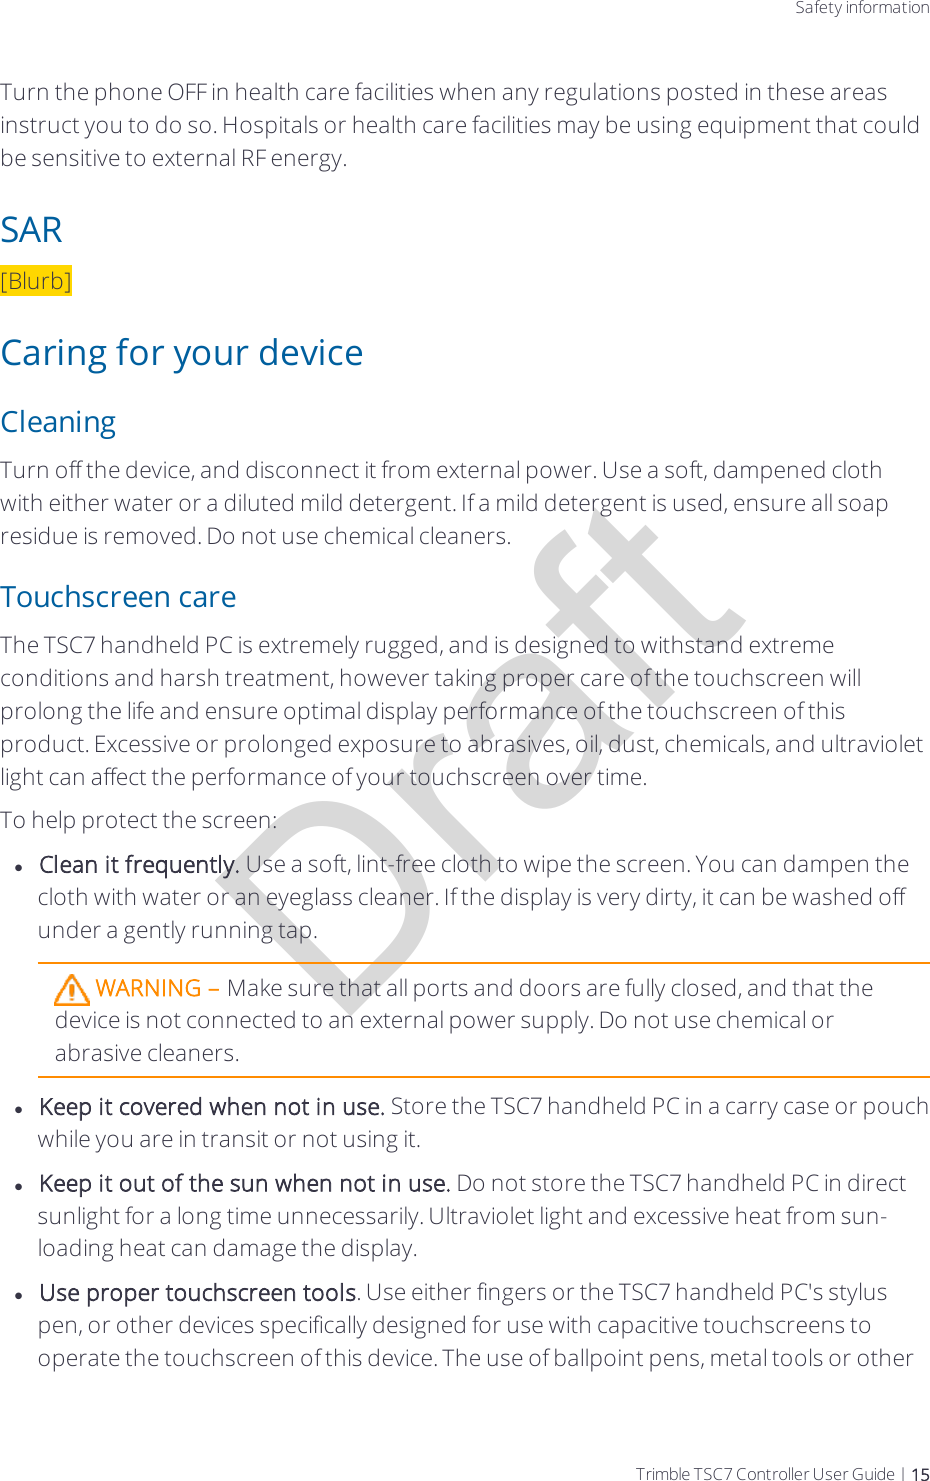 DraftSafety informationTurn the phone OFF in health care facilities when any regulations posted in these areas instruct you to do so. Hospitals or health care facilities may be using equipment that could be sensitive to external RF energy.SAR[Blurb]Caring for your deviceCleaningTurn off the device, and disconnect it from external power. Use a soft, dampened cloth with either water or a diluted mild detergent. If a mild detergent is used, ensure all soap residue is removed. Do not use chemical cleaners.Touchscreen careThe TSC7 handheld PC is extremely rugged, and is designed to withstand extreme conditions and harsh treatment, however taking proper care of the touchscreen will prolong the life and ensure optimal display performance of the touchscreen of this product. Excessive or prolonged  exposure to abrasives, oil, dust, chemicals, and ultraviolet light can affect the performance of your touchscreen over time.To help protect the screen:lClean it frequently. Use a soft, lint-free cloth to wipe the screen. You can dampen the cloth with water or an eyeglass cleaner. If the display is very dirty, it can be washed off under a gently running tap.WARNING – Make sure that all ports and doors are fully closed, and that the device is not connected to an external power supply. Do not use chemical or abrasive cleaners.lKeep it covered when not in use. Store the TSC7 handheld PC in a carry case or pouch while you are in transit or not using it.lKeep it out of the sun when not in use. Do not store the TSC7 handheld PC in direct sunlight for a long time unnecessarily. Ultraviolet light and excessive heat from sun-loading heat can damage the display.lUse proper touchscreen tools. Use either fingers or the TSC7 handheld PC&apos;s stylus pen, or other devices specifically designed for use with capacitive touchscreens to operate the touchscreen of this device. The use of ballpoint pens, metal tools or other Trimble TSC7 Controller User Guide | 15